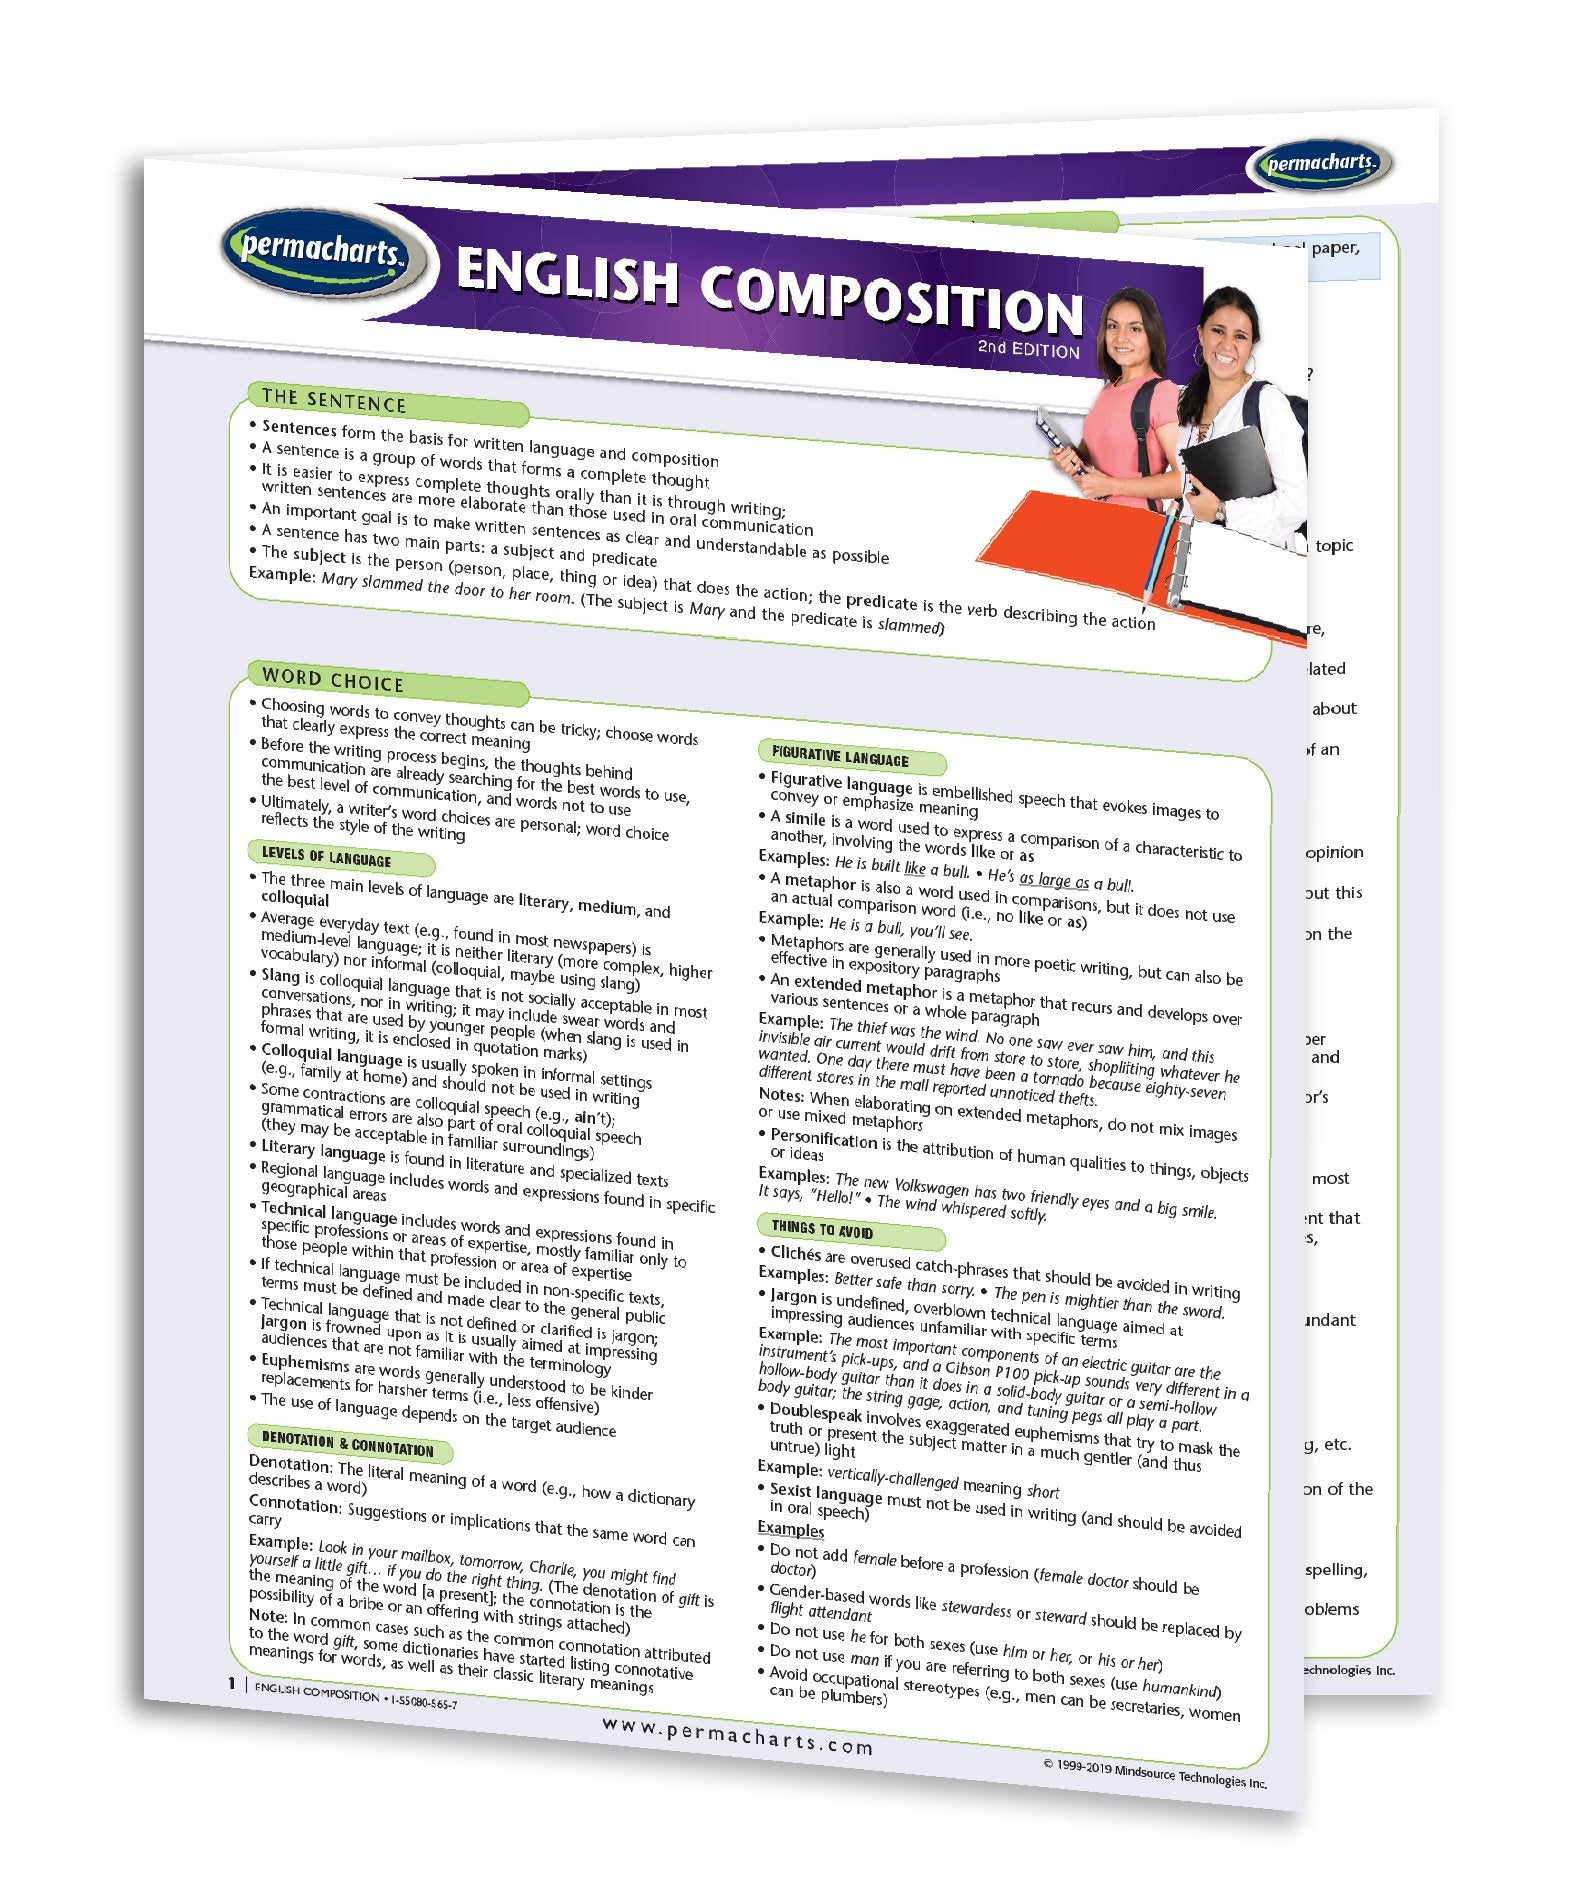 what is the composition in english language